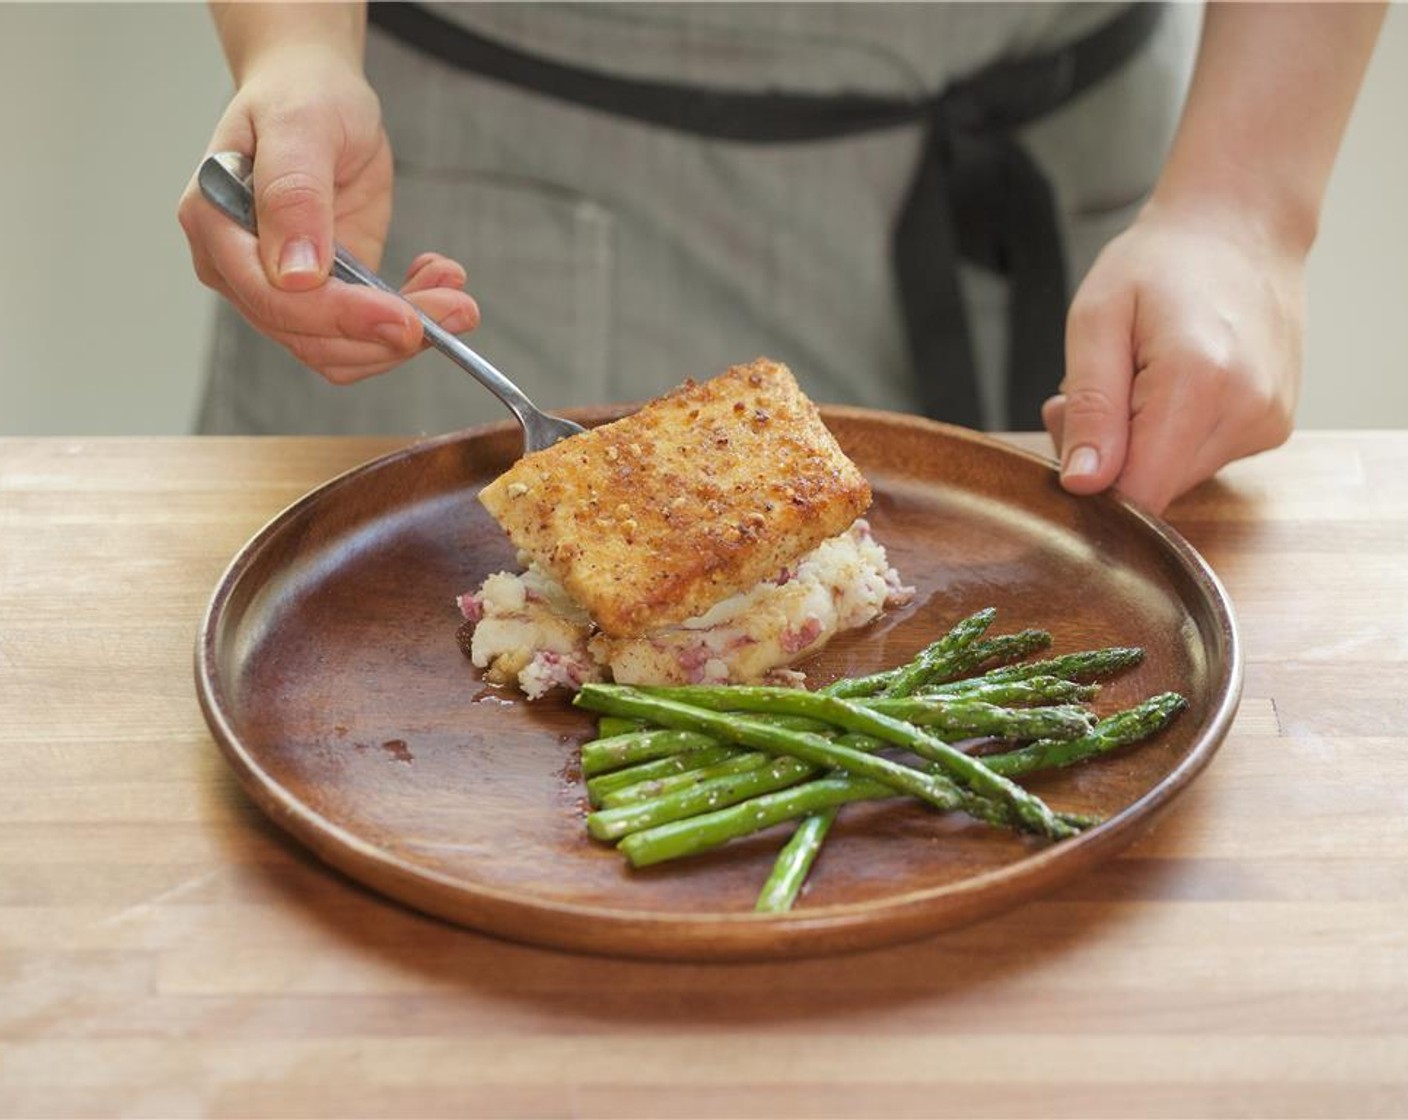 step 14 In the center of two plates, place the mashed potatoes. Add the halibut fillets directly on top. Plate asparagus next to mashed potatoes. Spoon sauce over the fish.